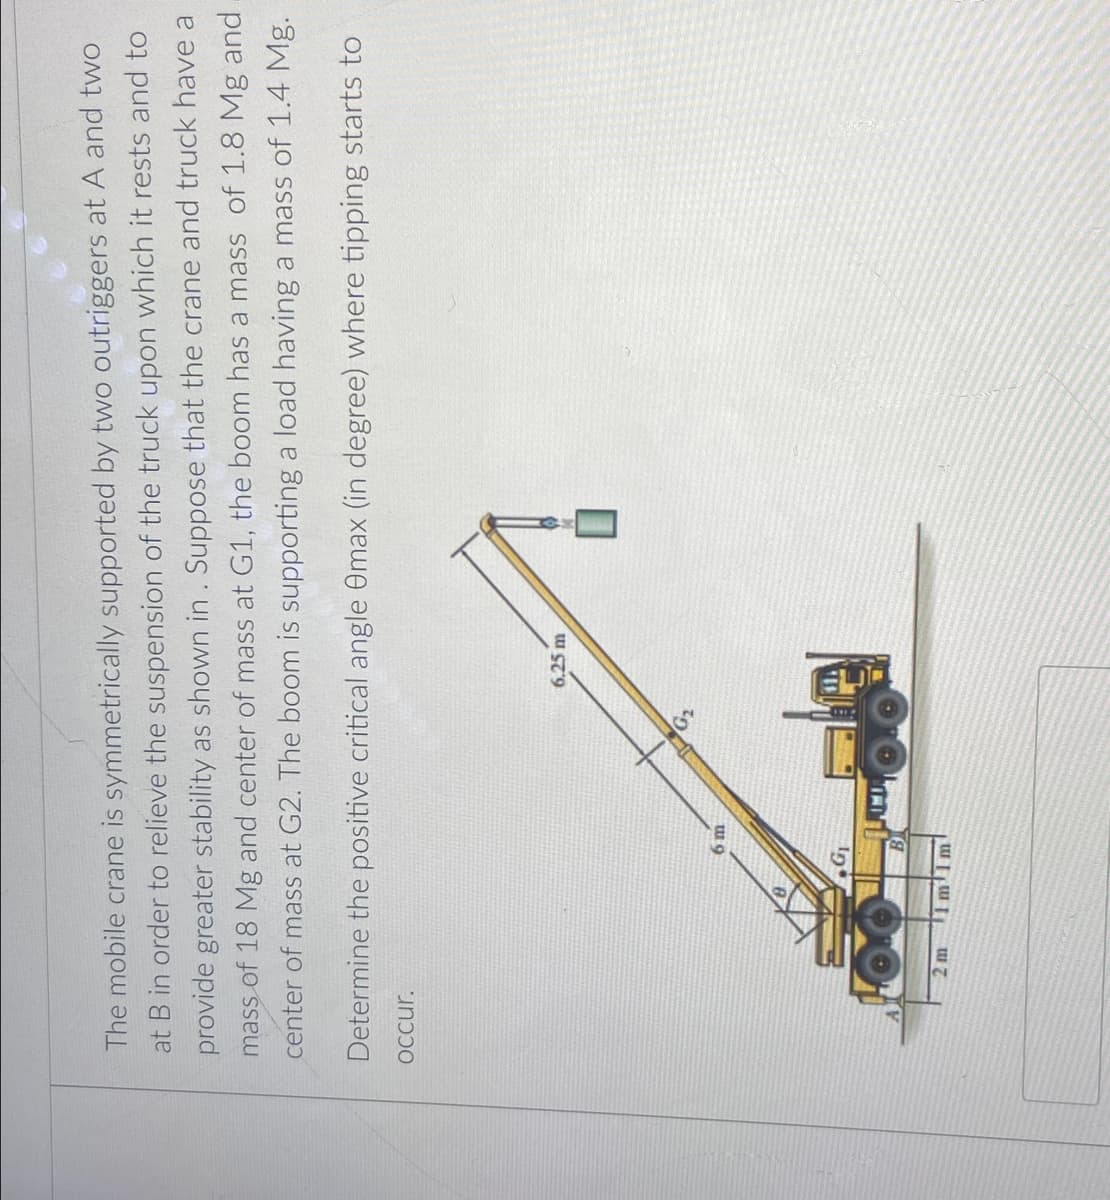 The mobile crane is symmetrically supported by two outriggers at A and two
at B in order to relieve the suspension of the truck upon which it rests and to
provide greater stability as shown in. Suppose that the crane and truck have a
mass of 18 Mg and center of mass at G1, the boom has a mass of 1.8 Mg and
center of mass at G2. The boom is supporting a load having a mass of 1.4 Mg.
Determine the positive critical angle 0max (in degree) where tipping starts to
OCcur.
6.25 m
INI
2 m
T1mlm
